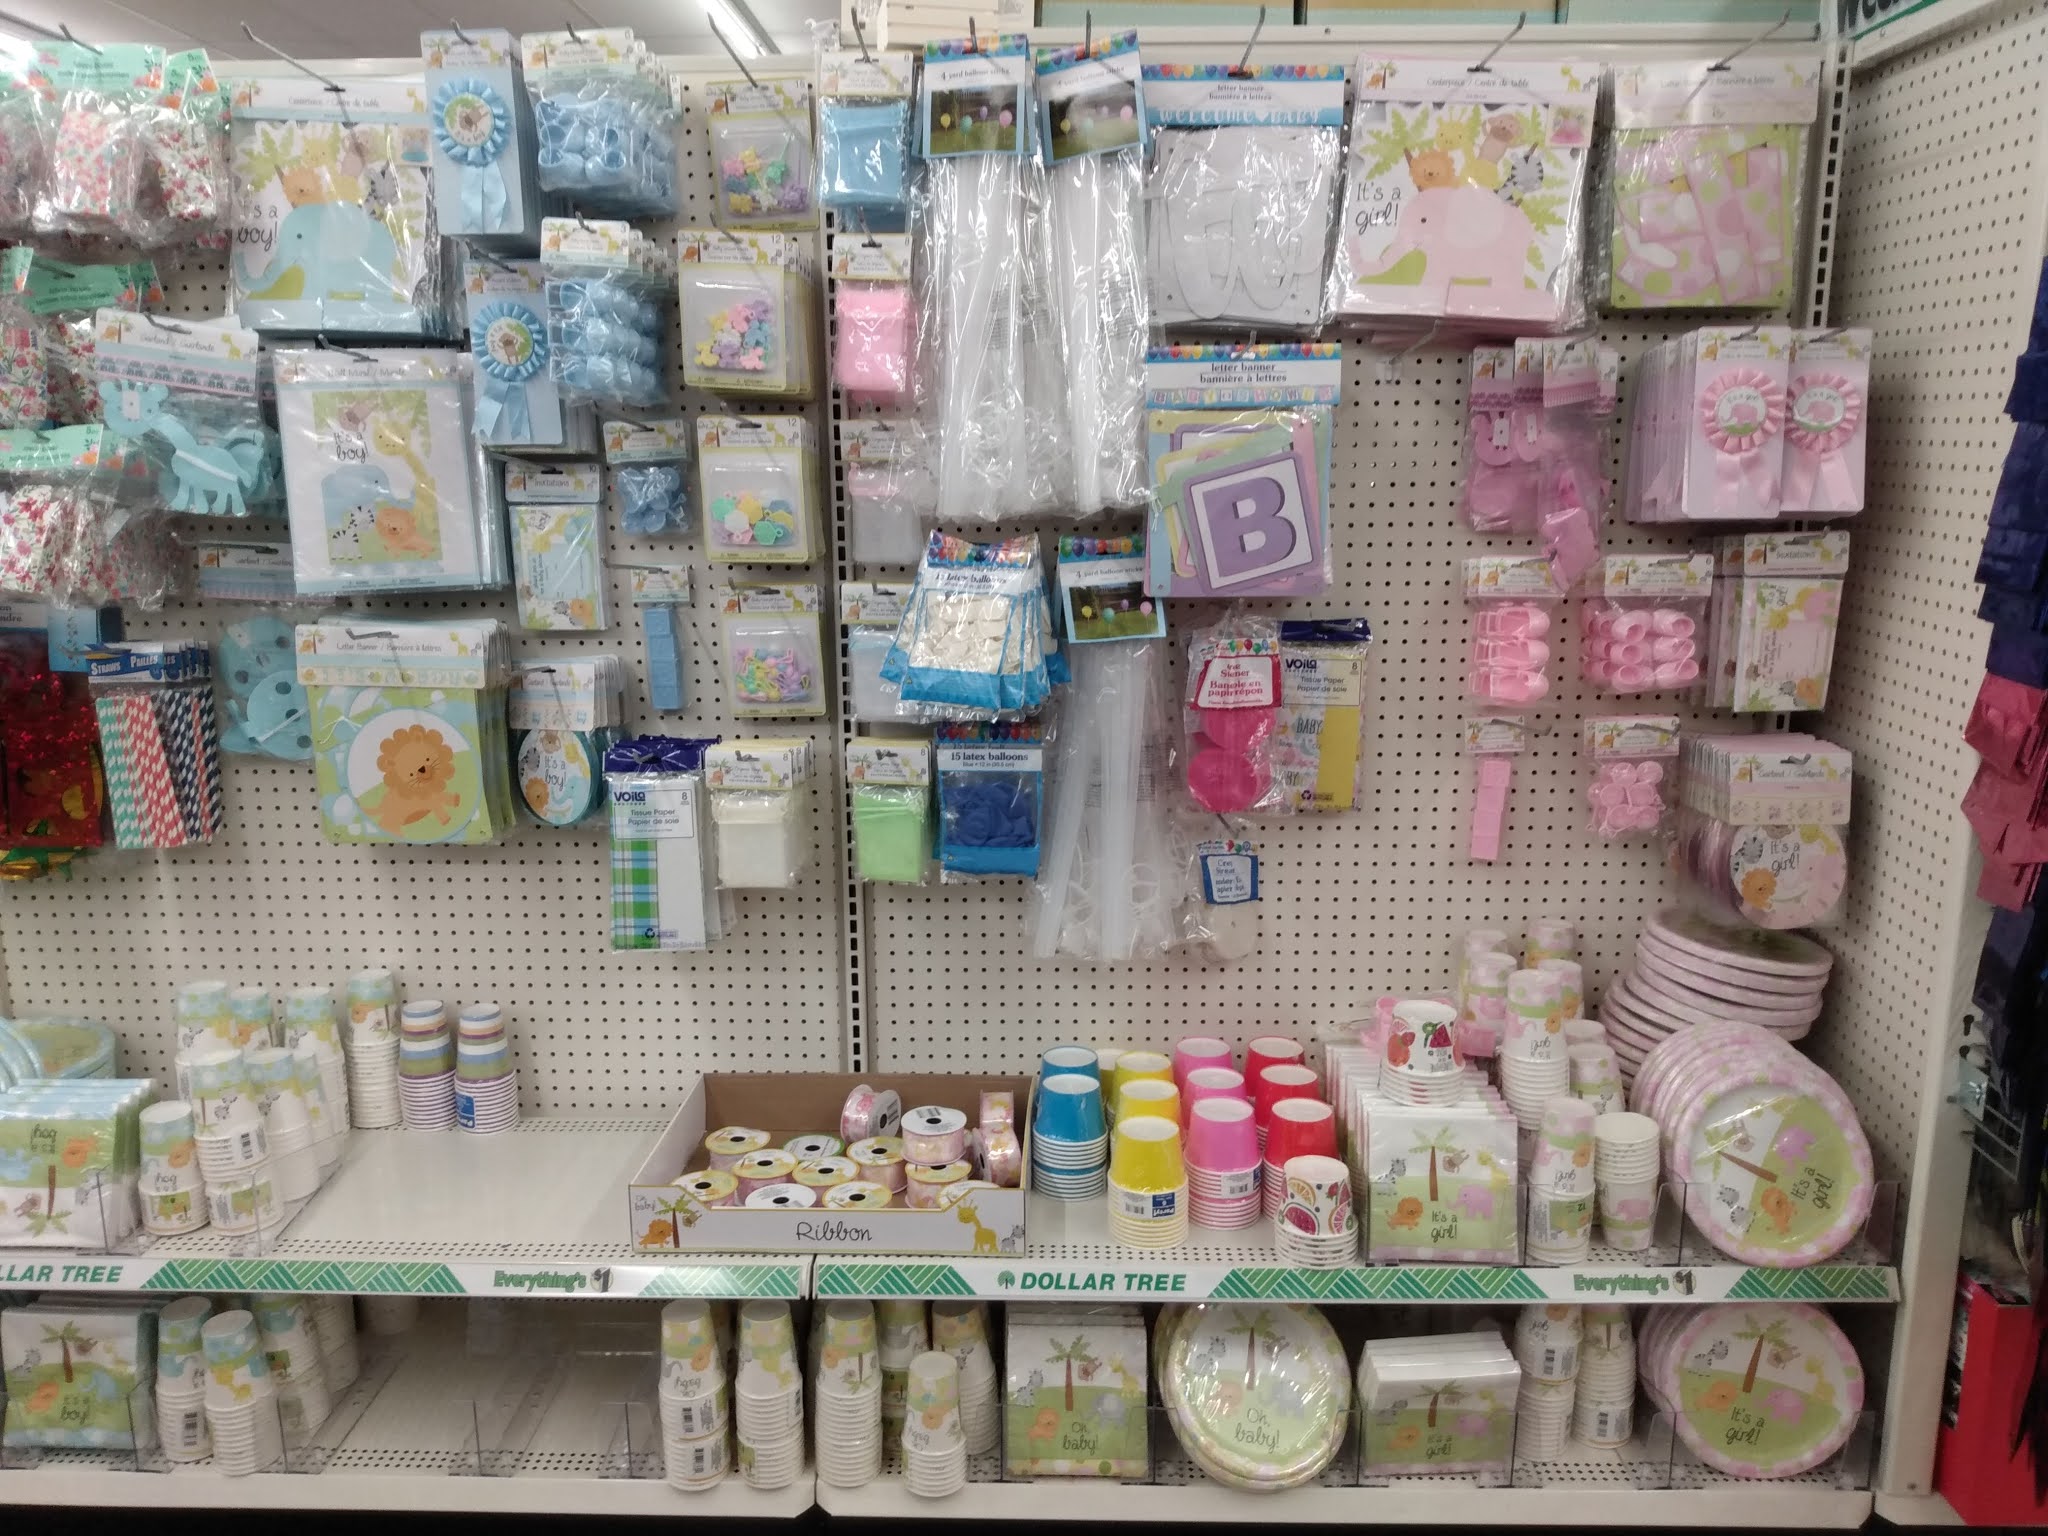 15 NEW items at DOLLAR TREE to LOOK for